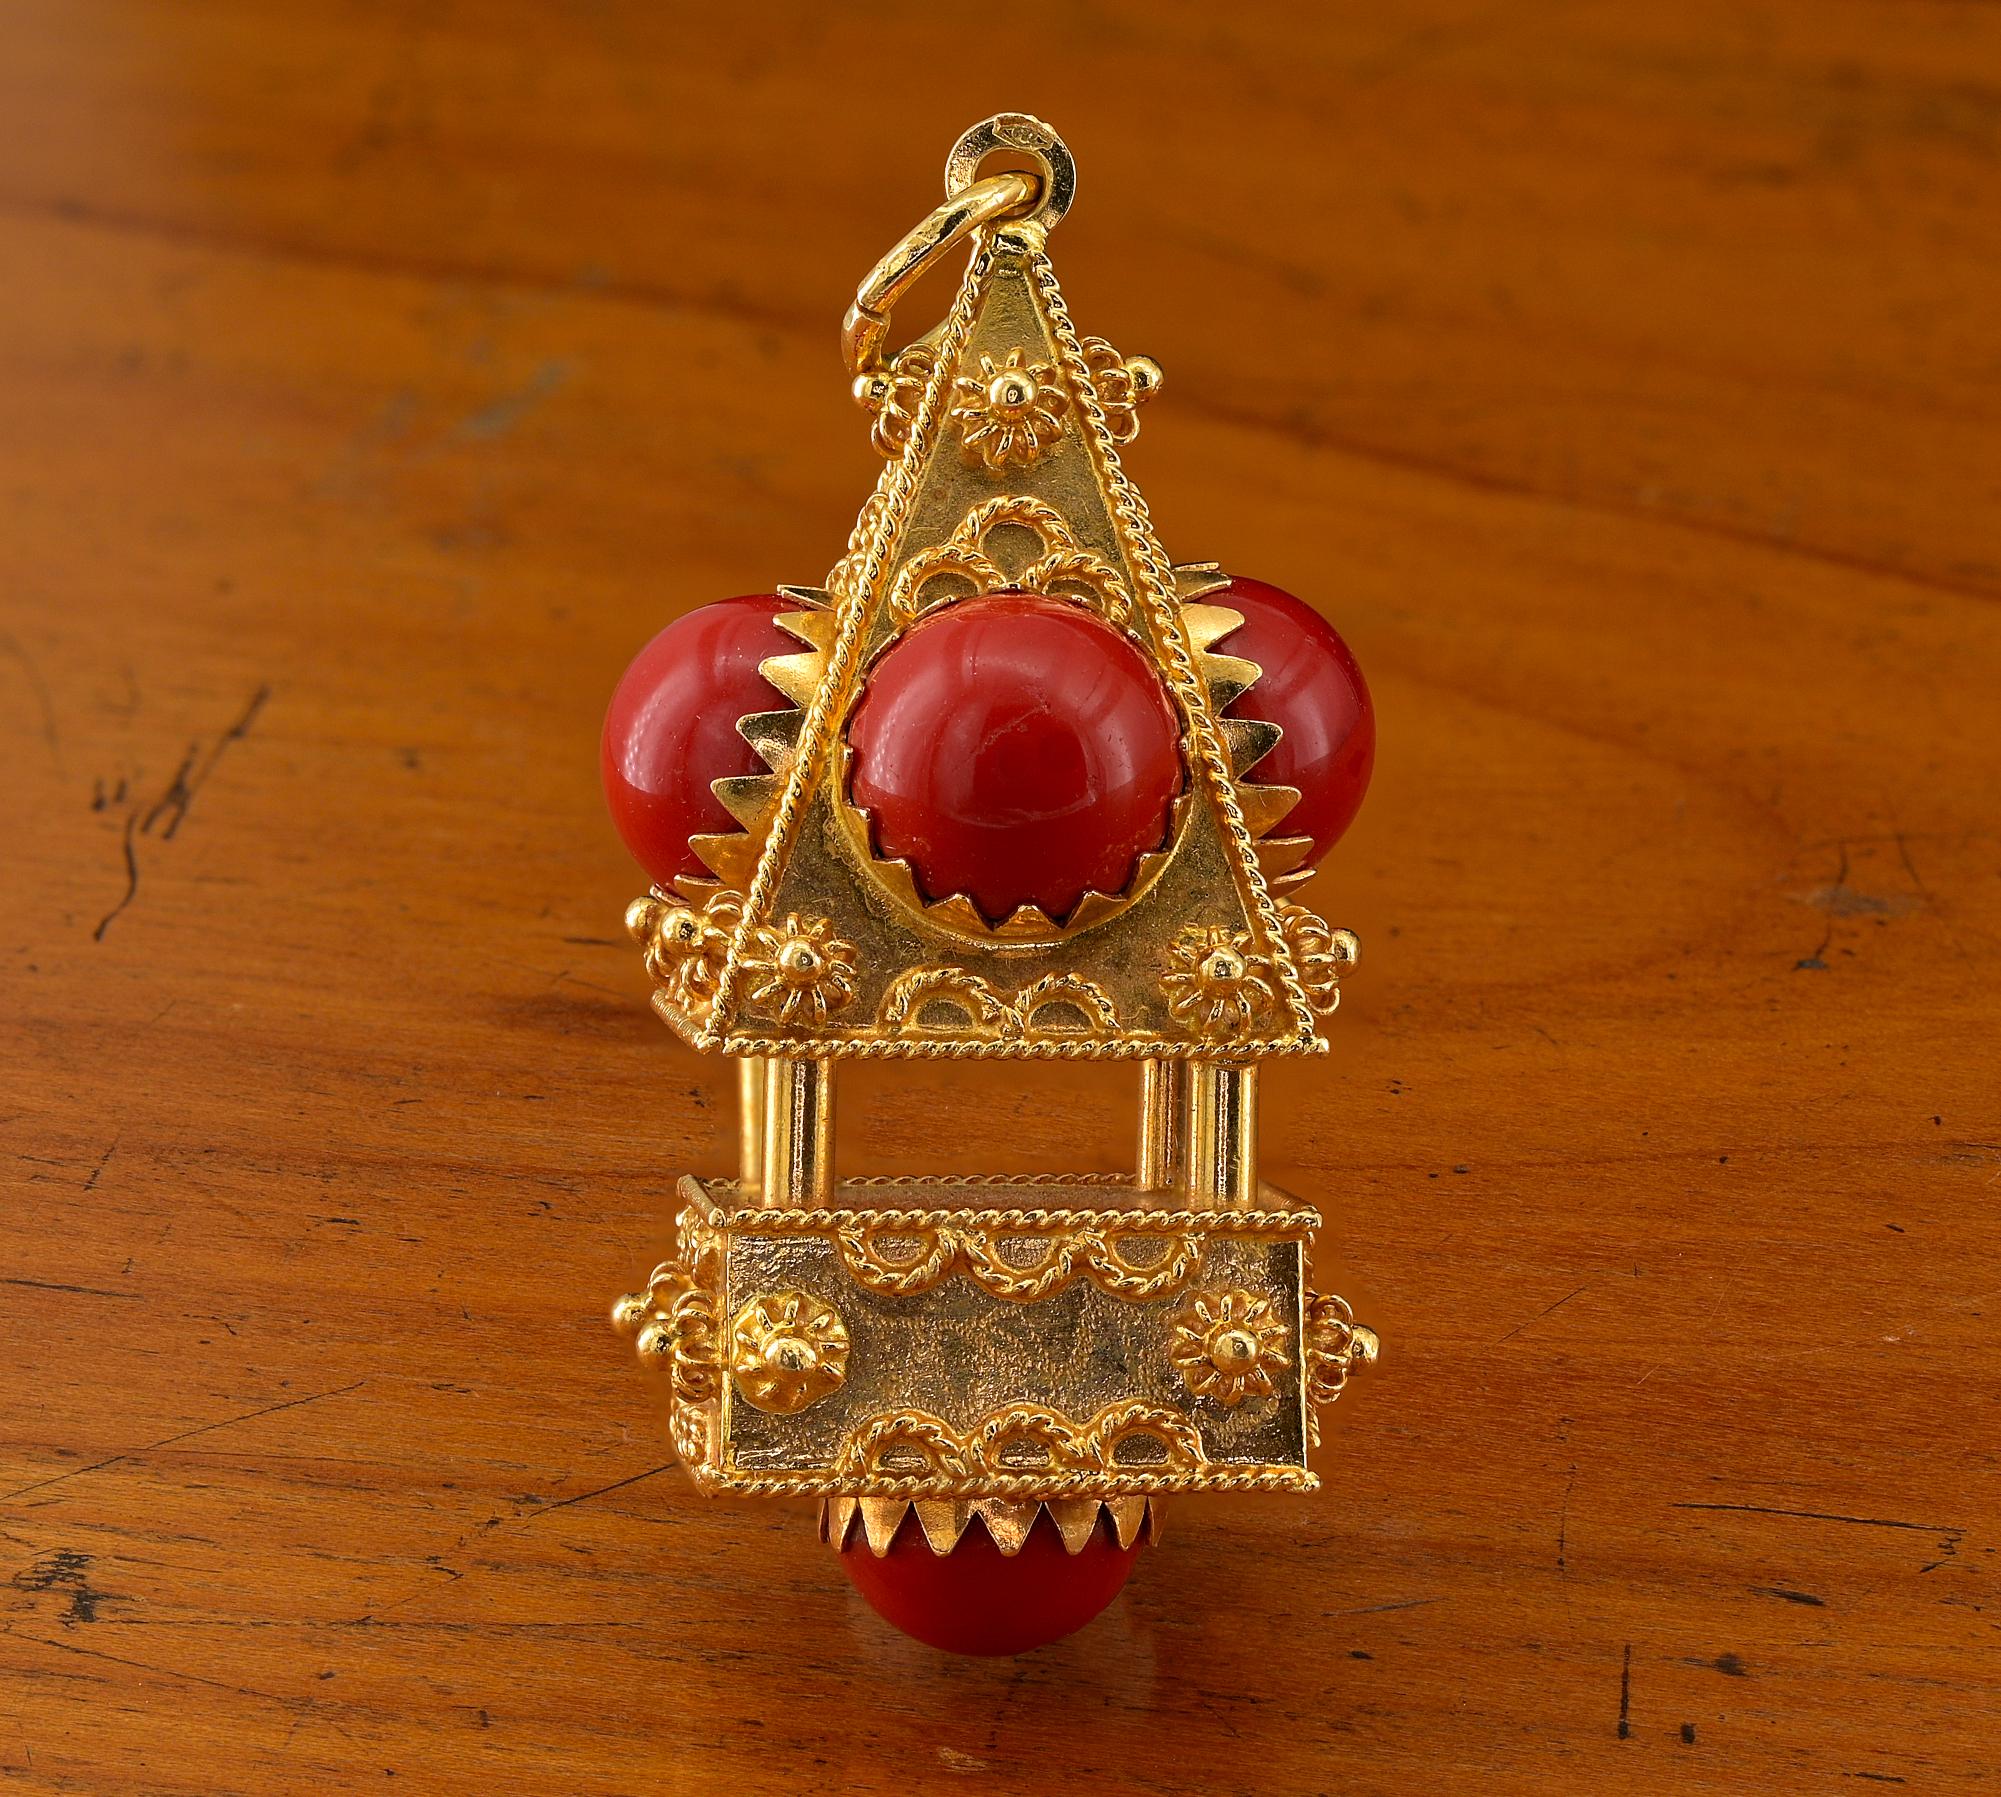 This outstanding vintage Italian Etruscan Revival large fob is 1950/60 ca
An unique version of heavy 18 KT solid gold Venetian lantern fob – weighs an incredibly 22.7 grams -the majority are 7 – 12 grams
Lovely complex workmanship beautifully